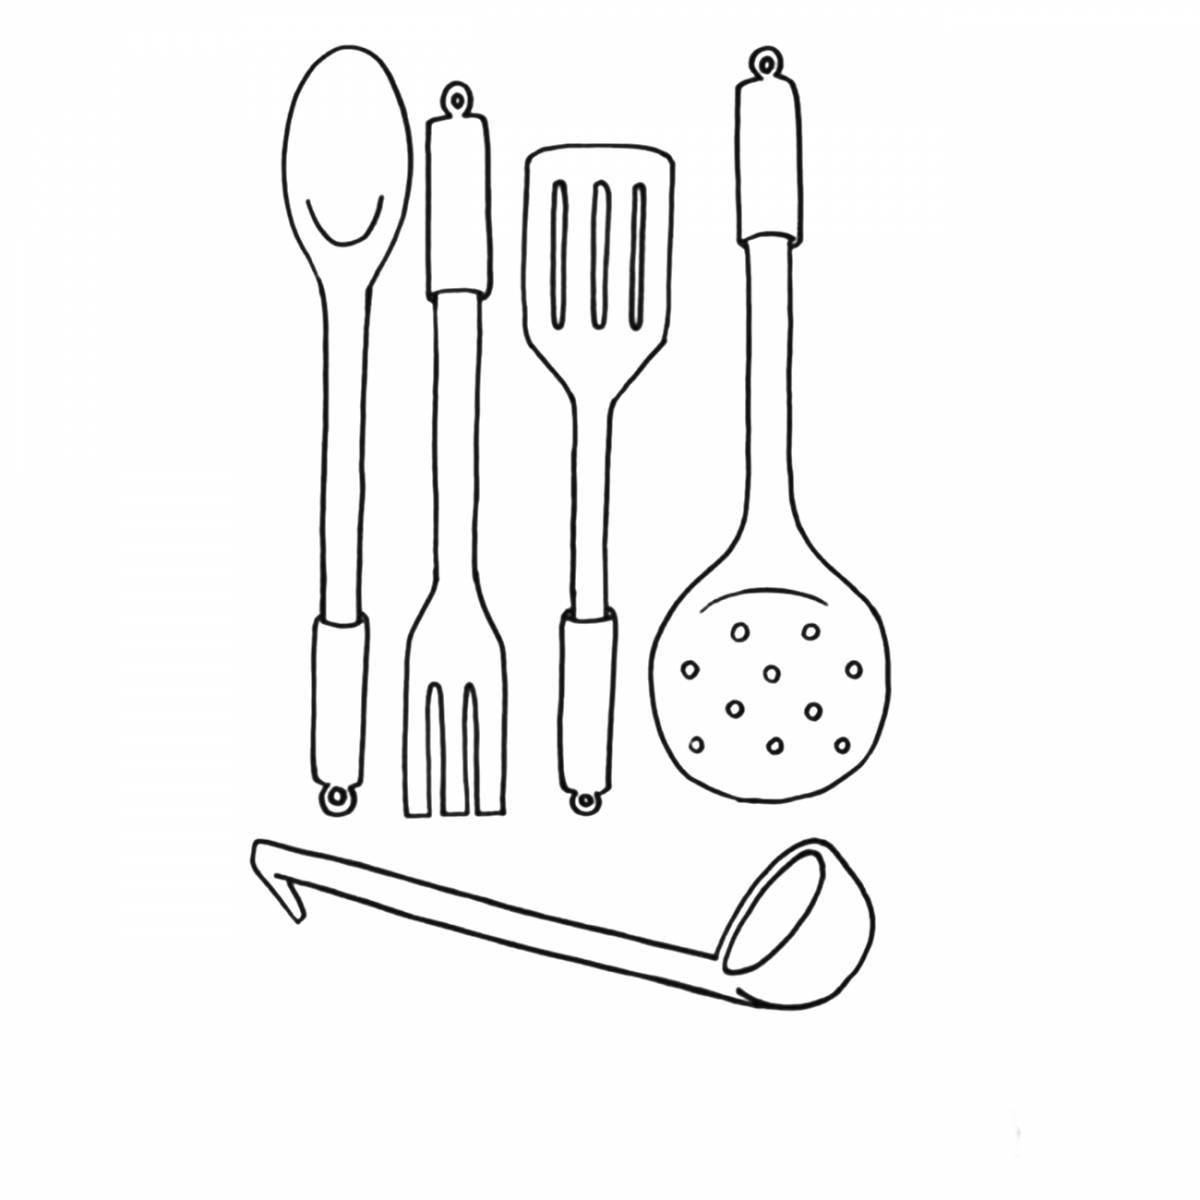 Coloring book funny cooking tools